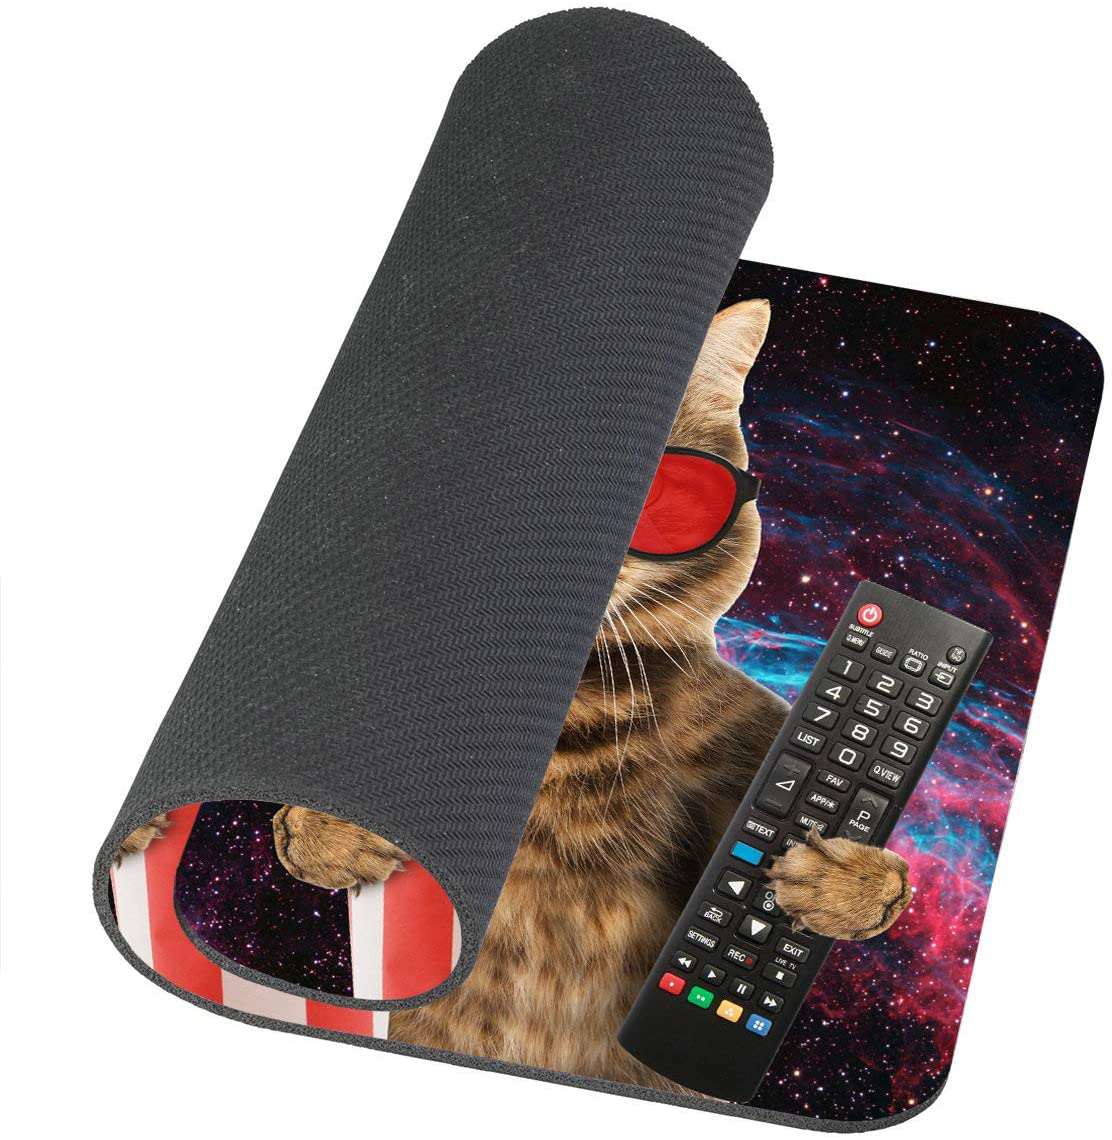 Amcove Funny cat in The 3D Glasses with Popcorn Basket Mousepad Non-Slip Rubber Gaming Mouse Pad Rectangle Mouse Pads for Computers Laptop Cat Desk Accessories